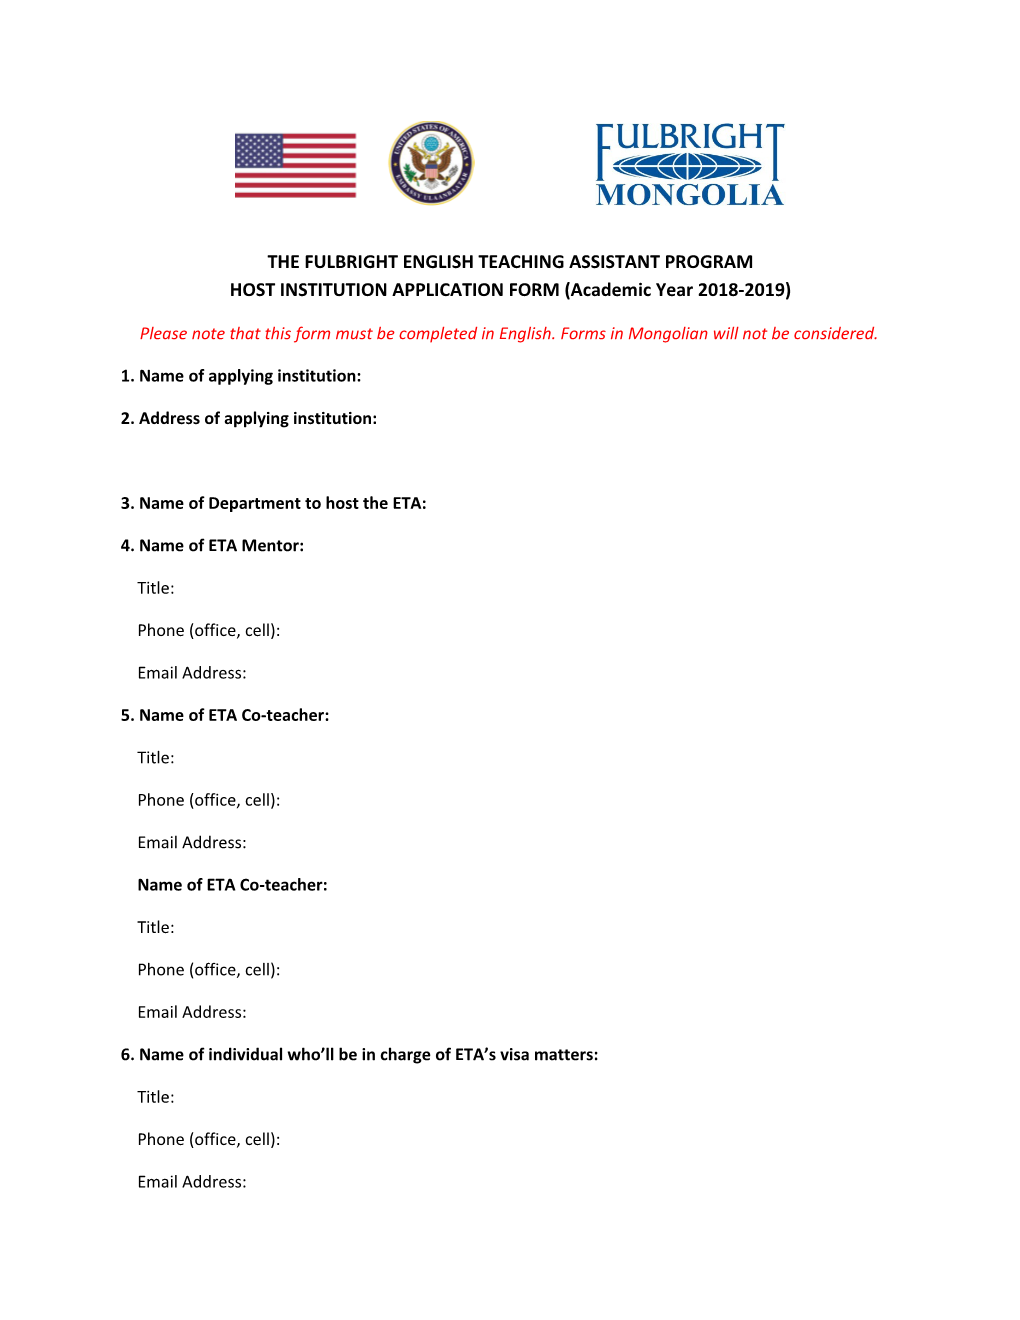 THE FULBRIGHT ENGLISH TEACHING ASSISTANT PROGRAM HOST INSTITUTION APPLICATION FORM (Academic